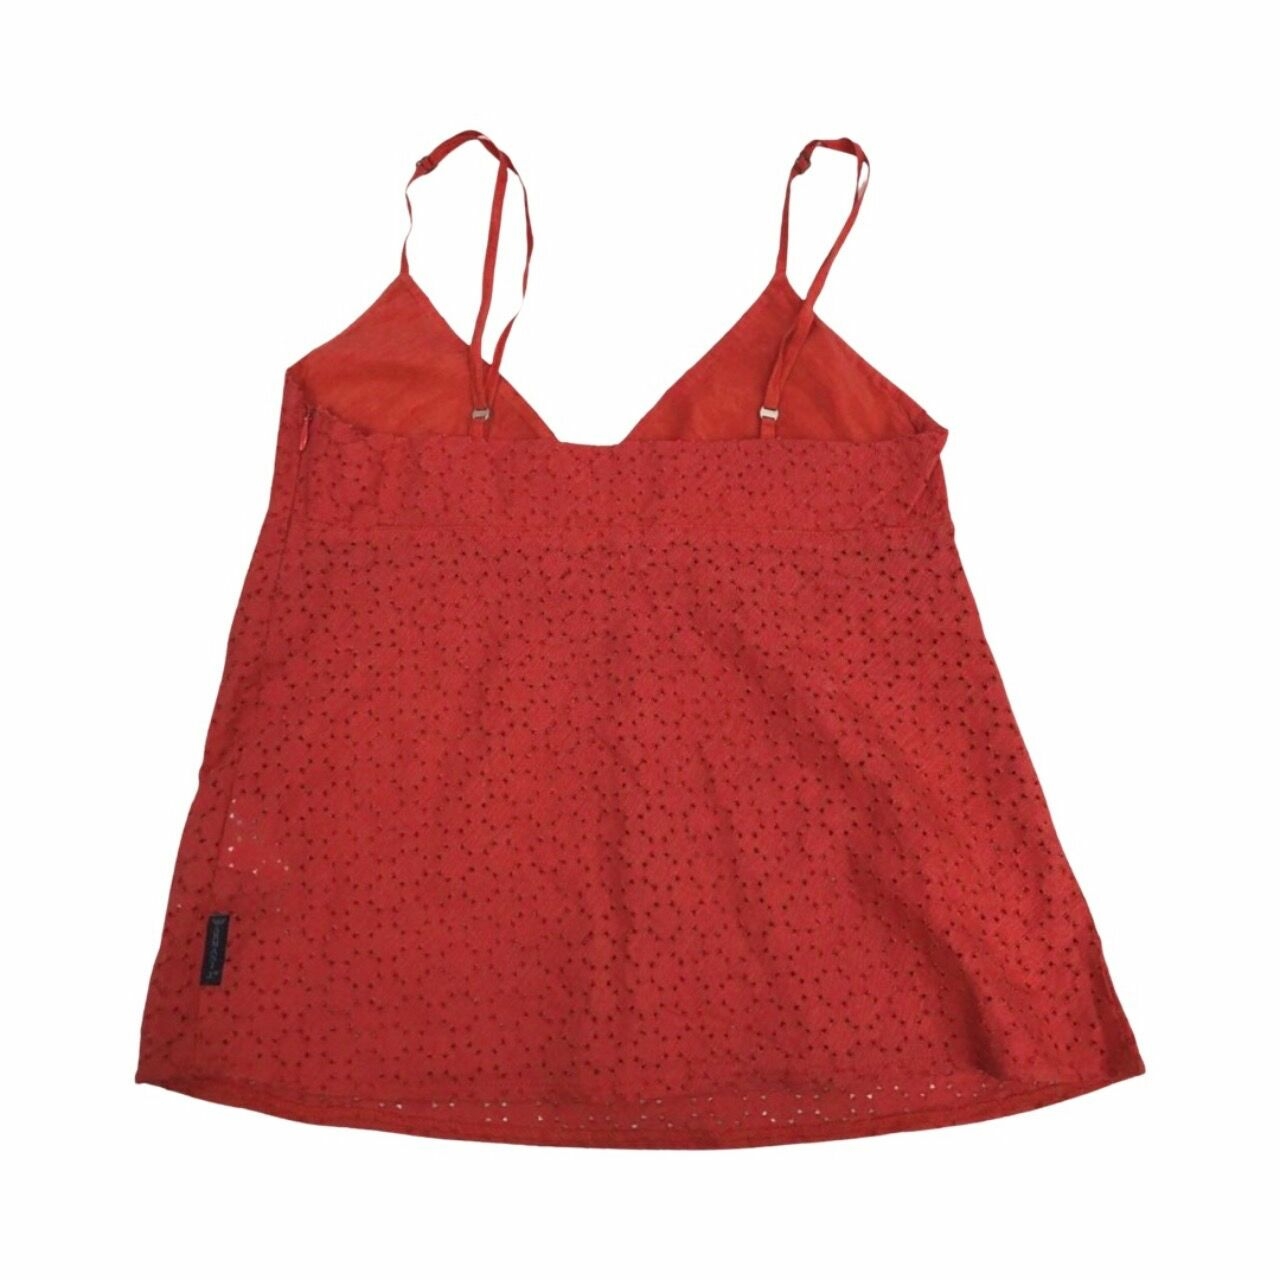 Armani Jeans Perforated Coral Red Sleeveless